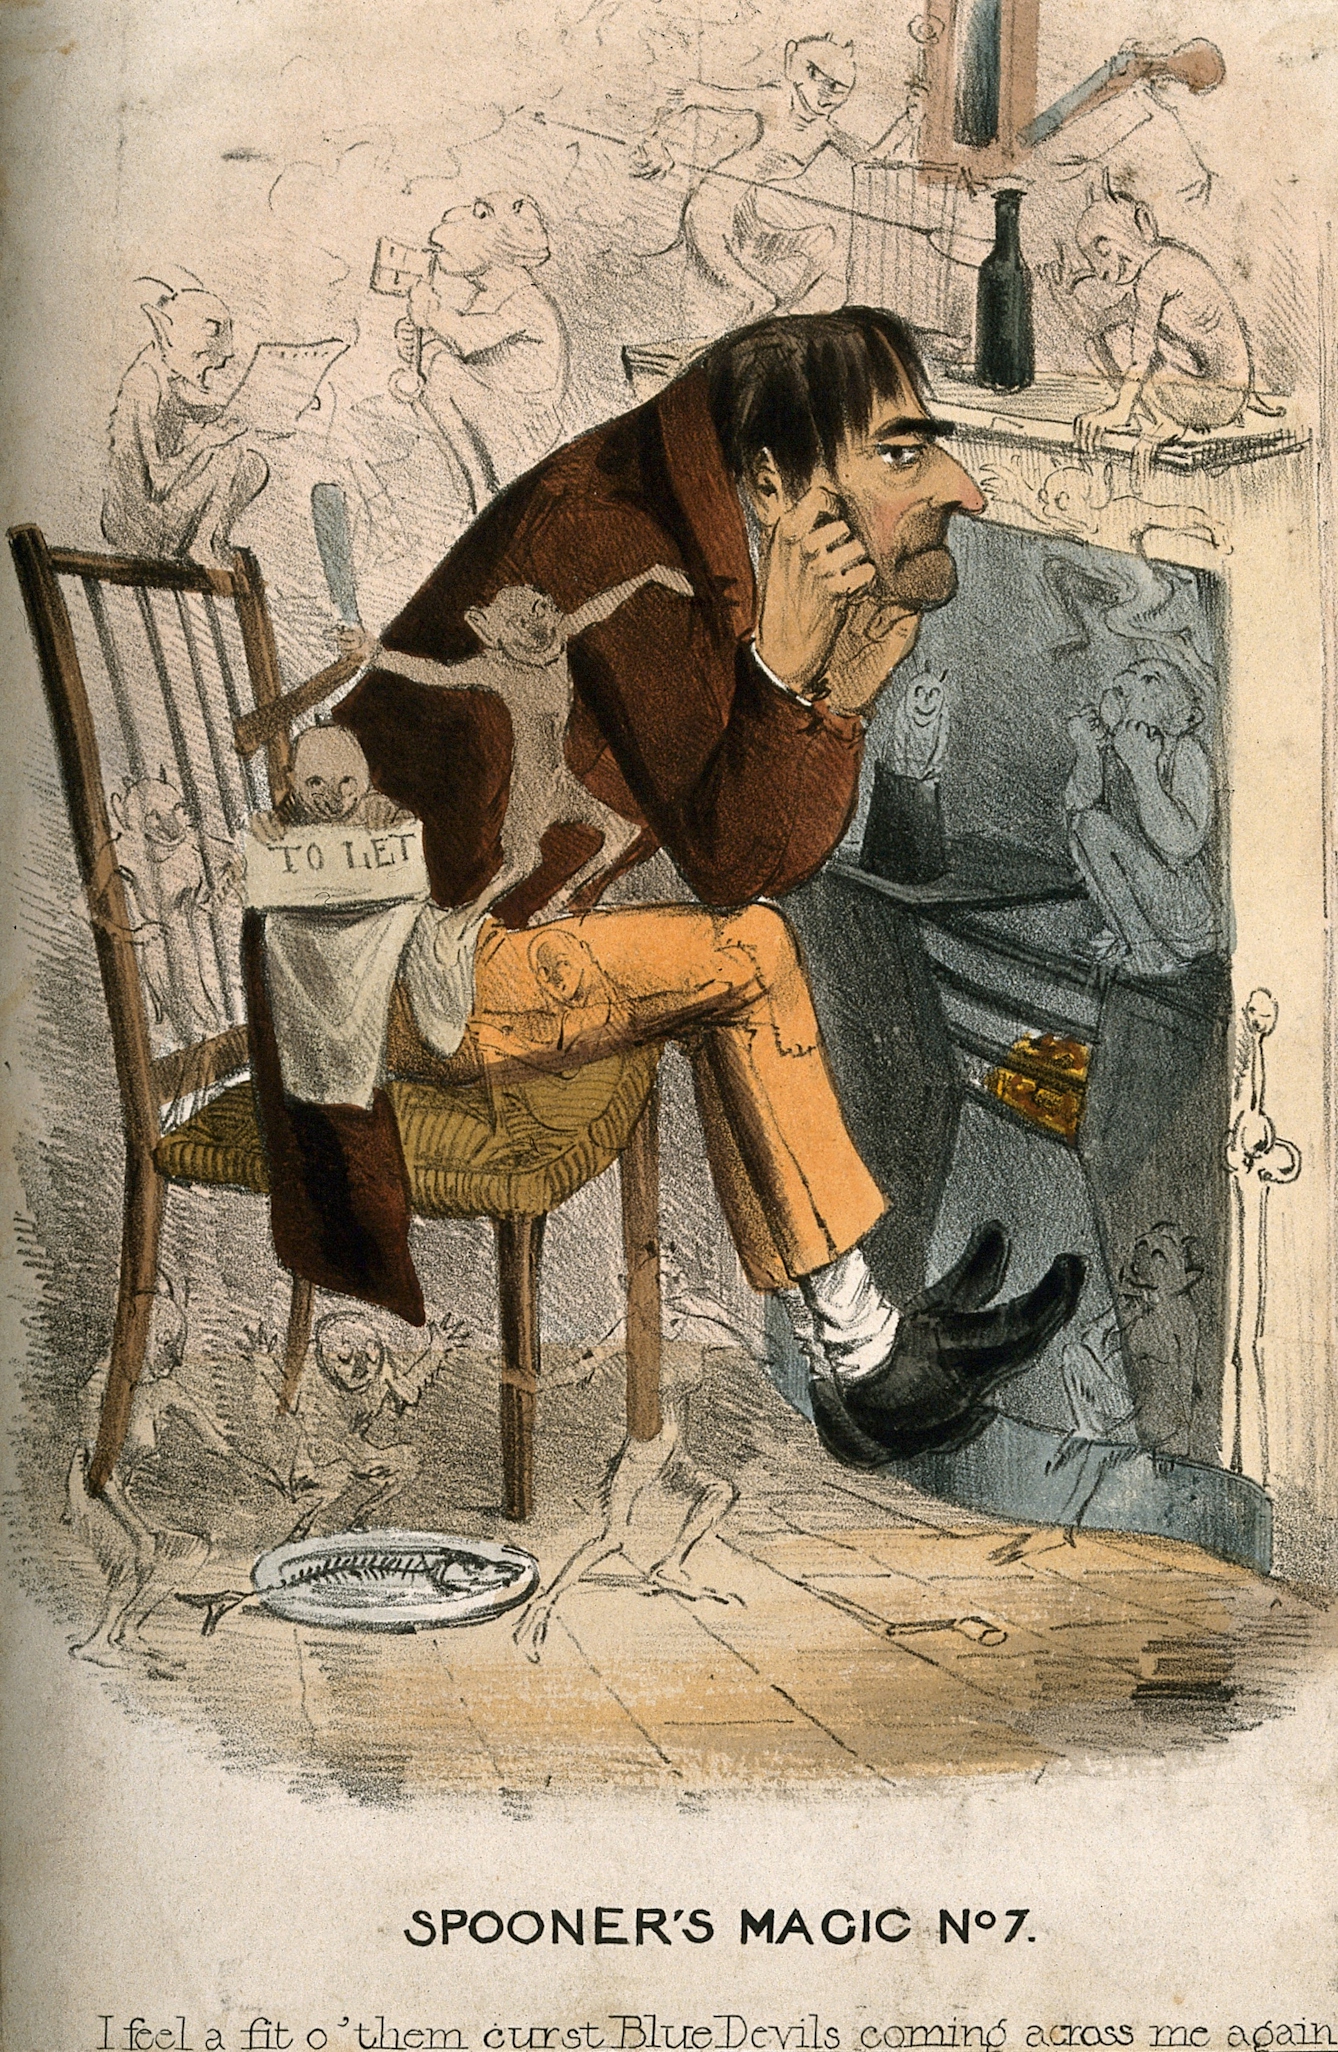 Coloured lithograph showing a man sitting on a wooden chair in front of a stove looking glum, with his chin resting on his hands and imp-like creatures frolicking around him. Lettering reads "I feel a fit o'them curst blue devil coming across me again".